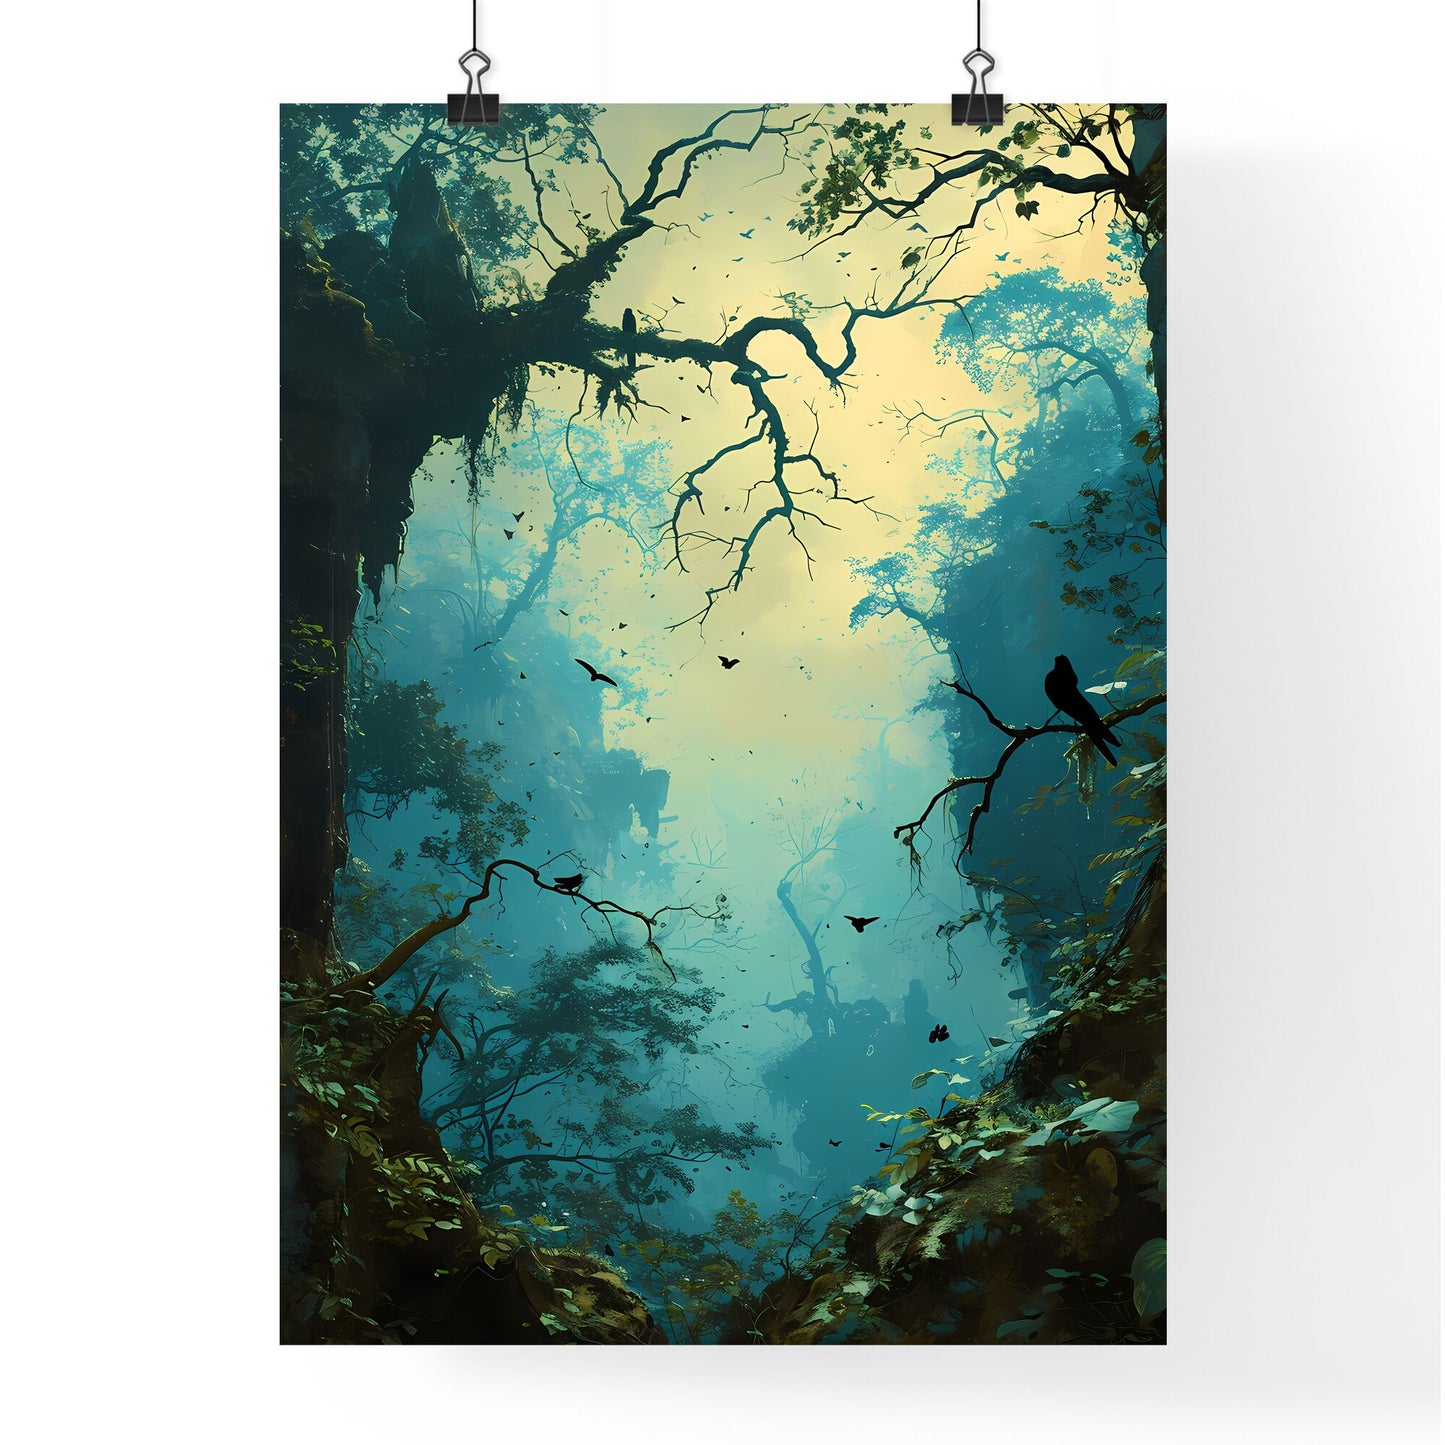 A Poster of graphic design art nouveau - A Group Of Birds In A Forest Default Title